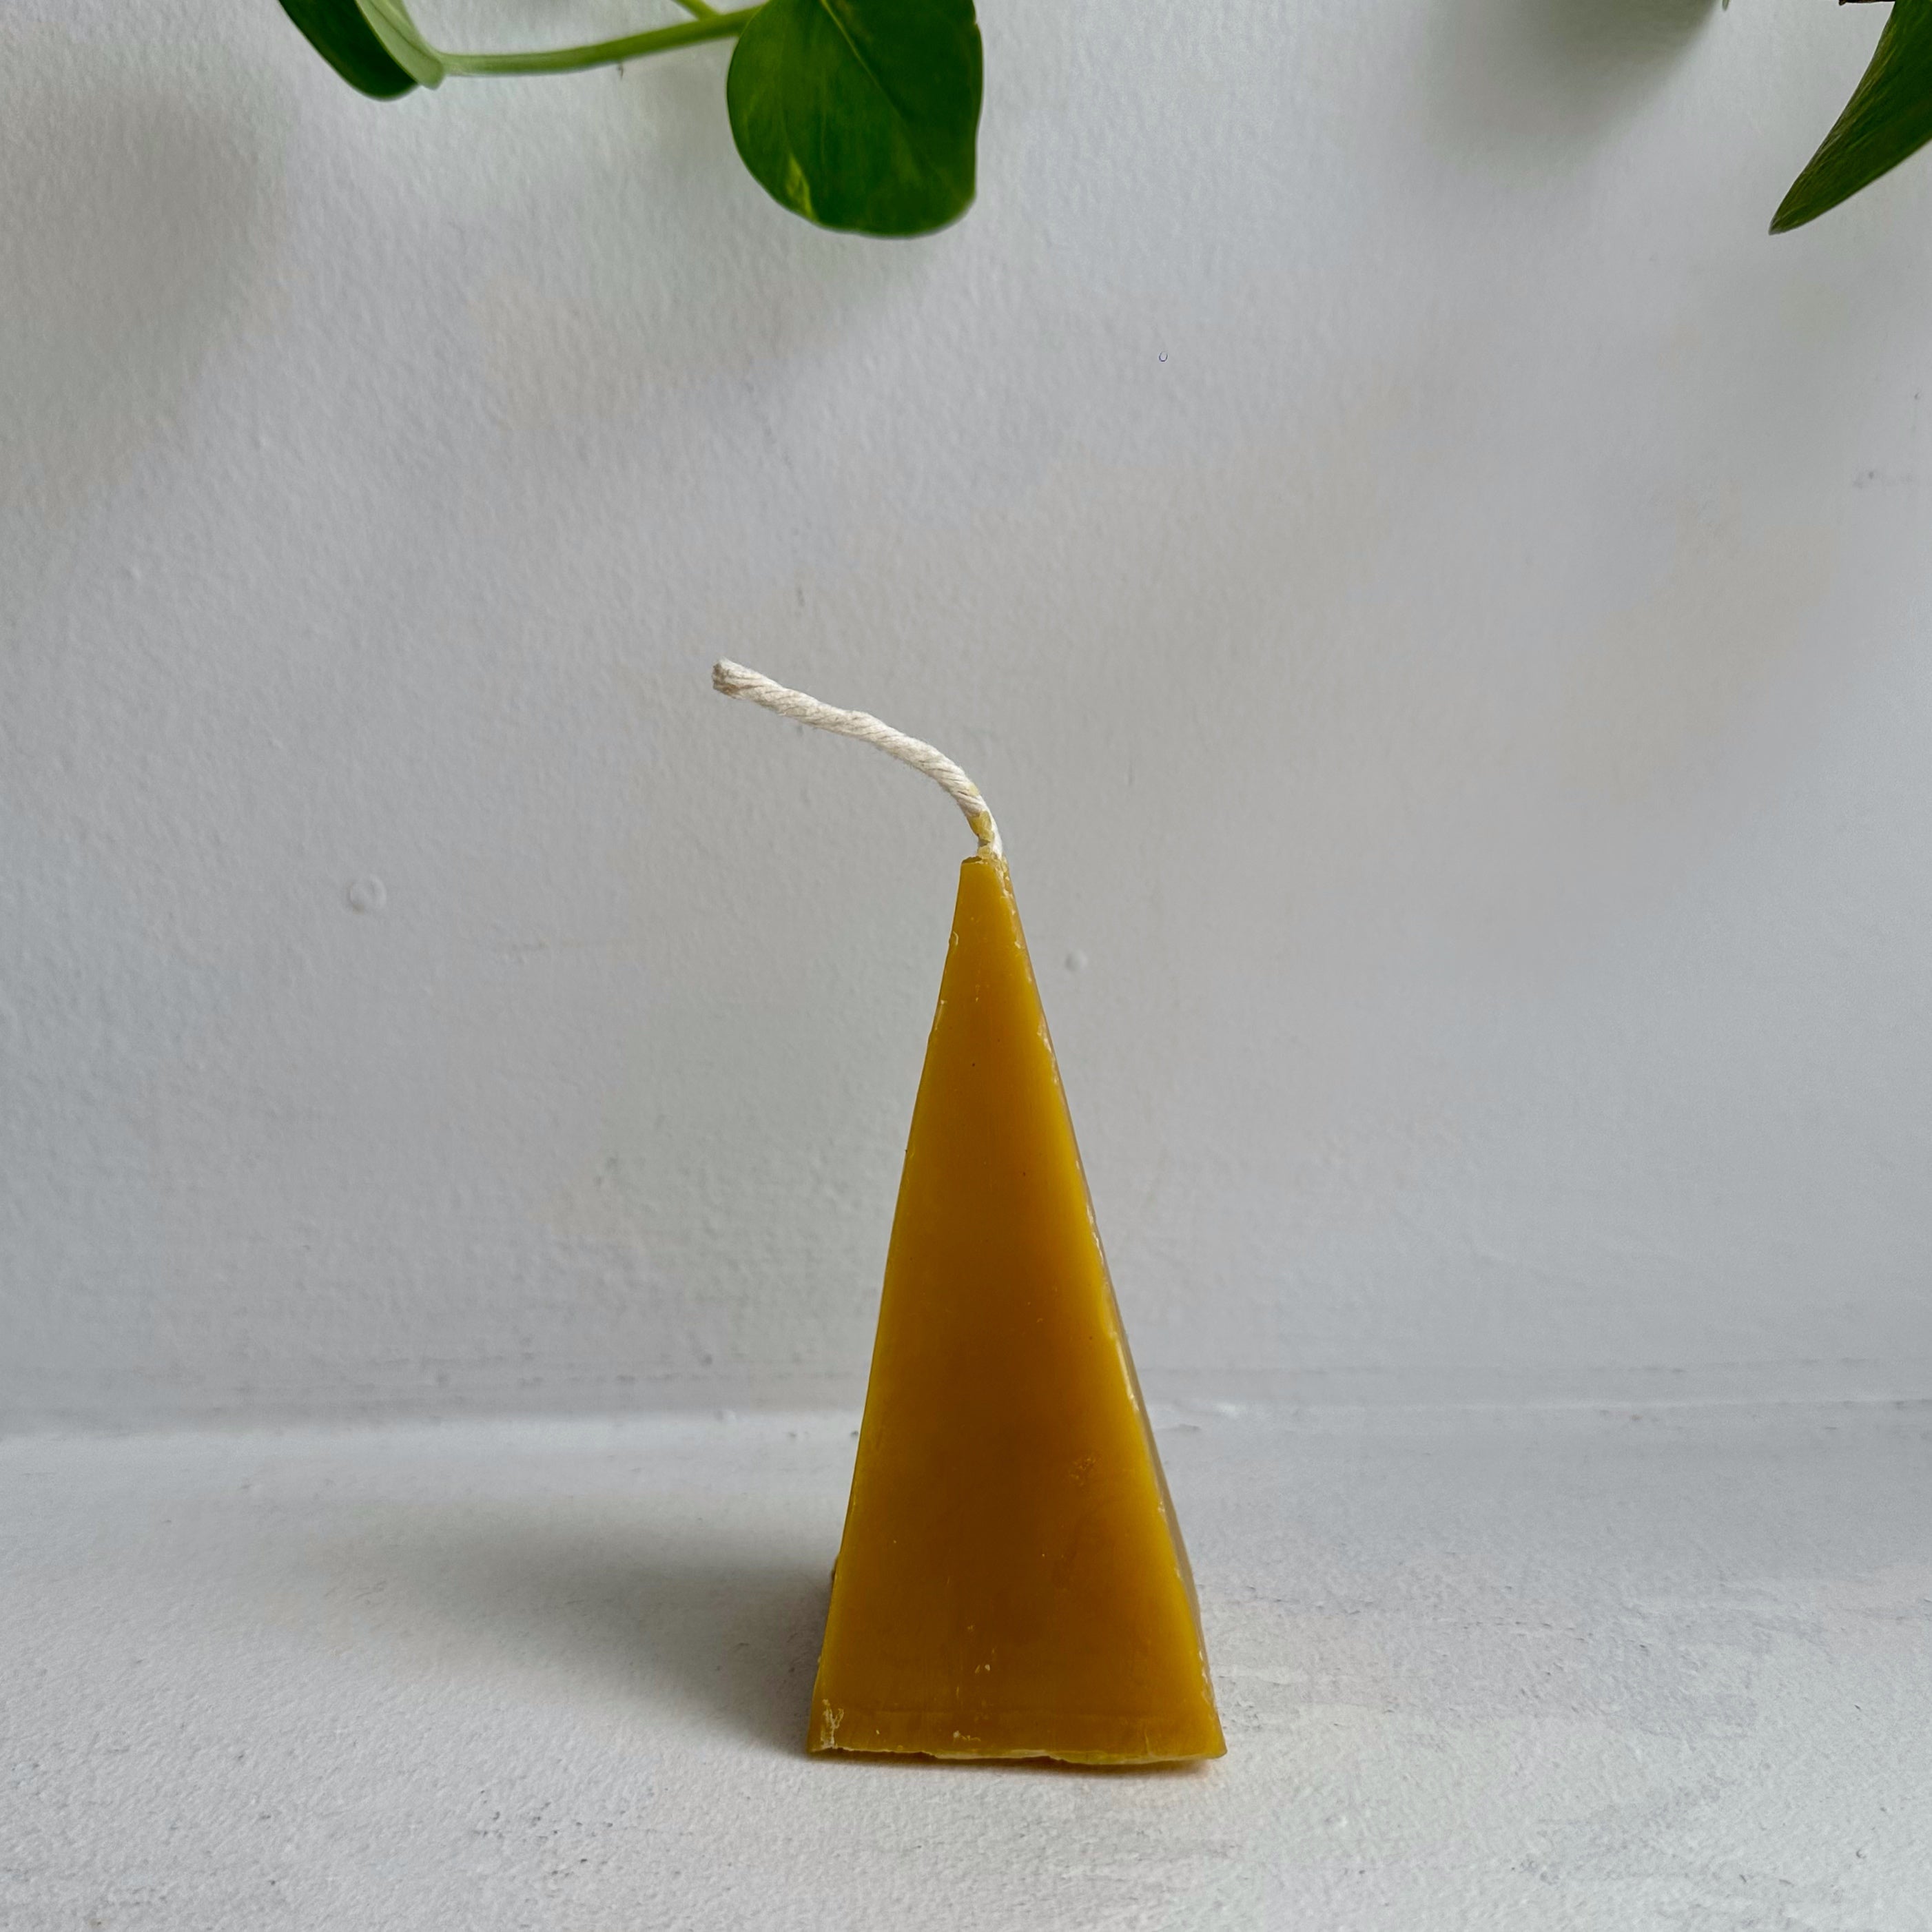 Pyramid Pure Beeswax Candle